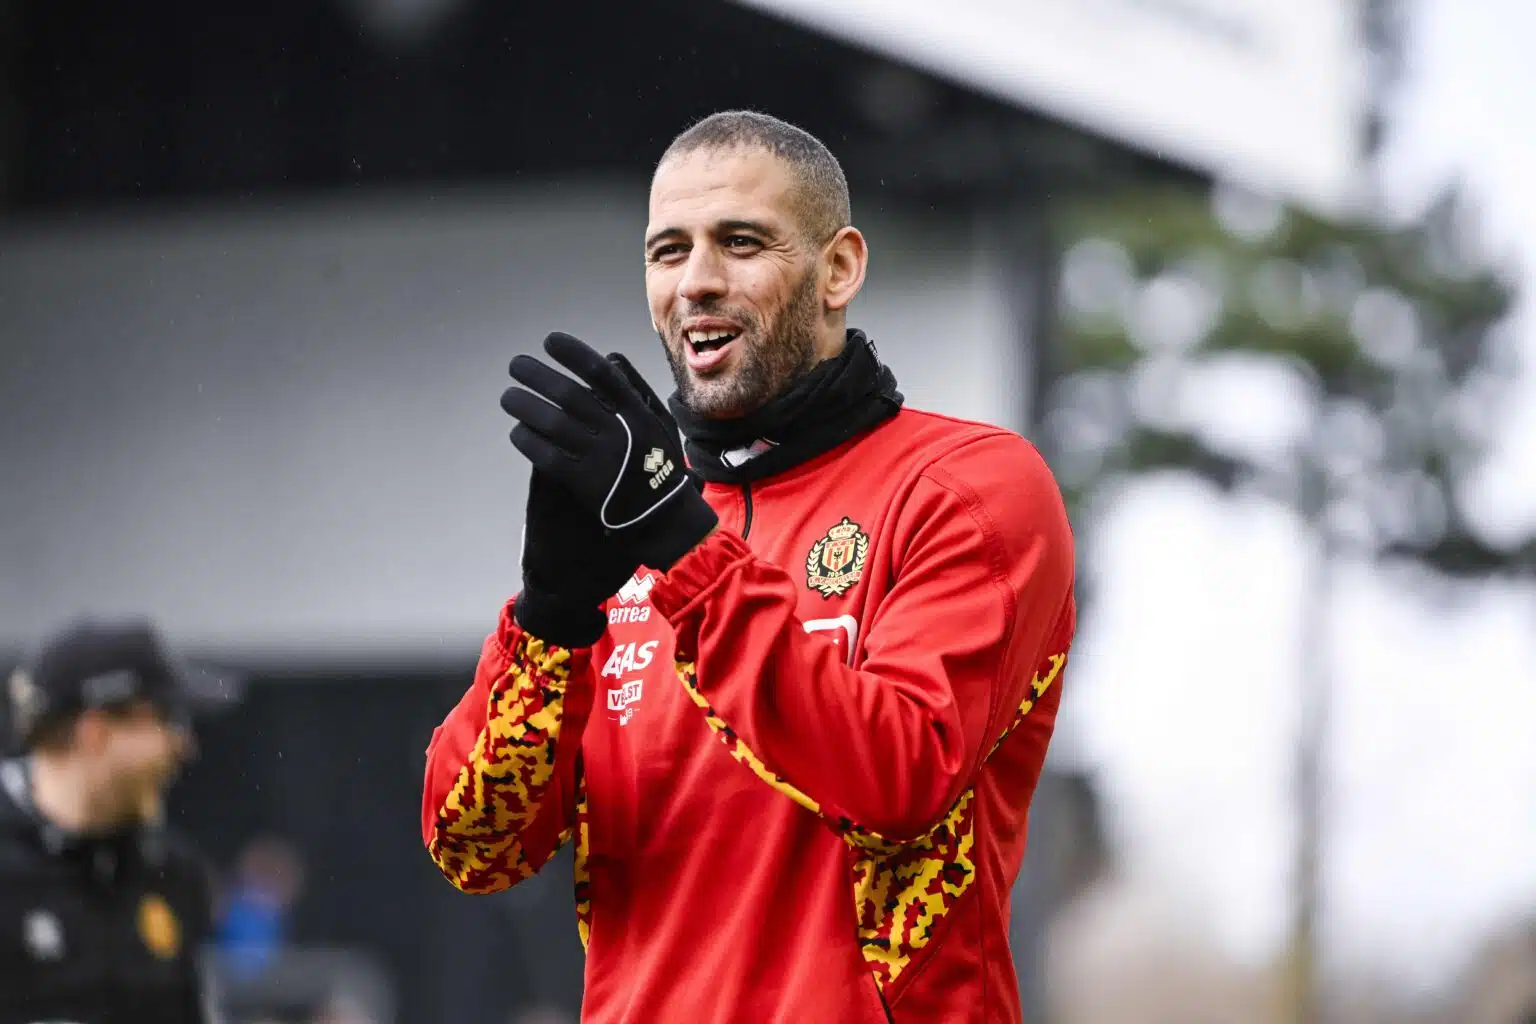 AJ Auxerre eyes Islam Slimani as potential summer signing